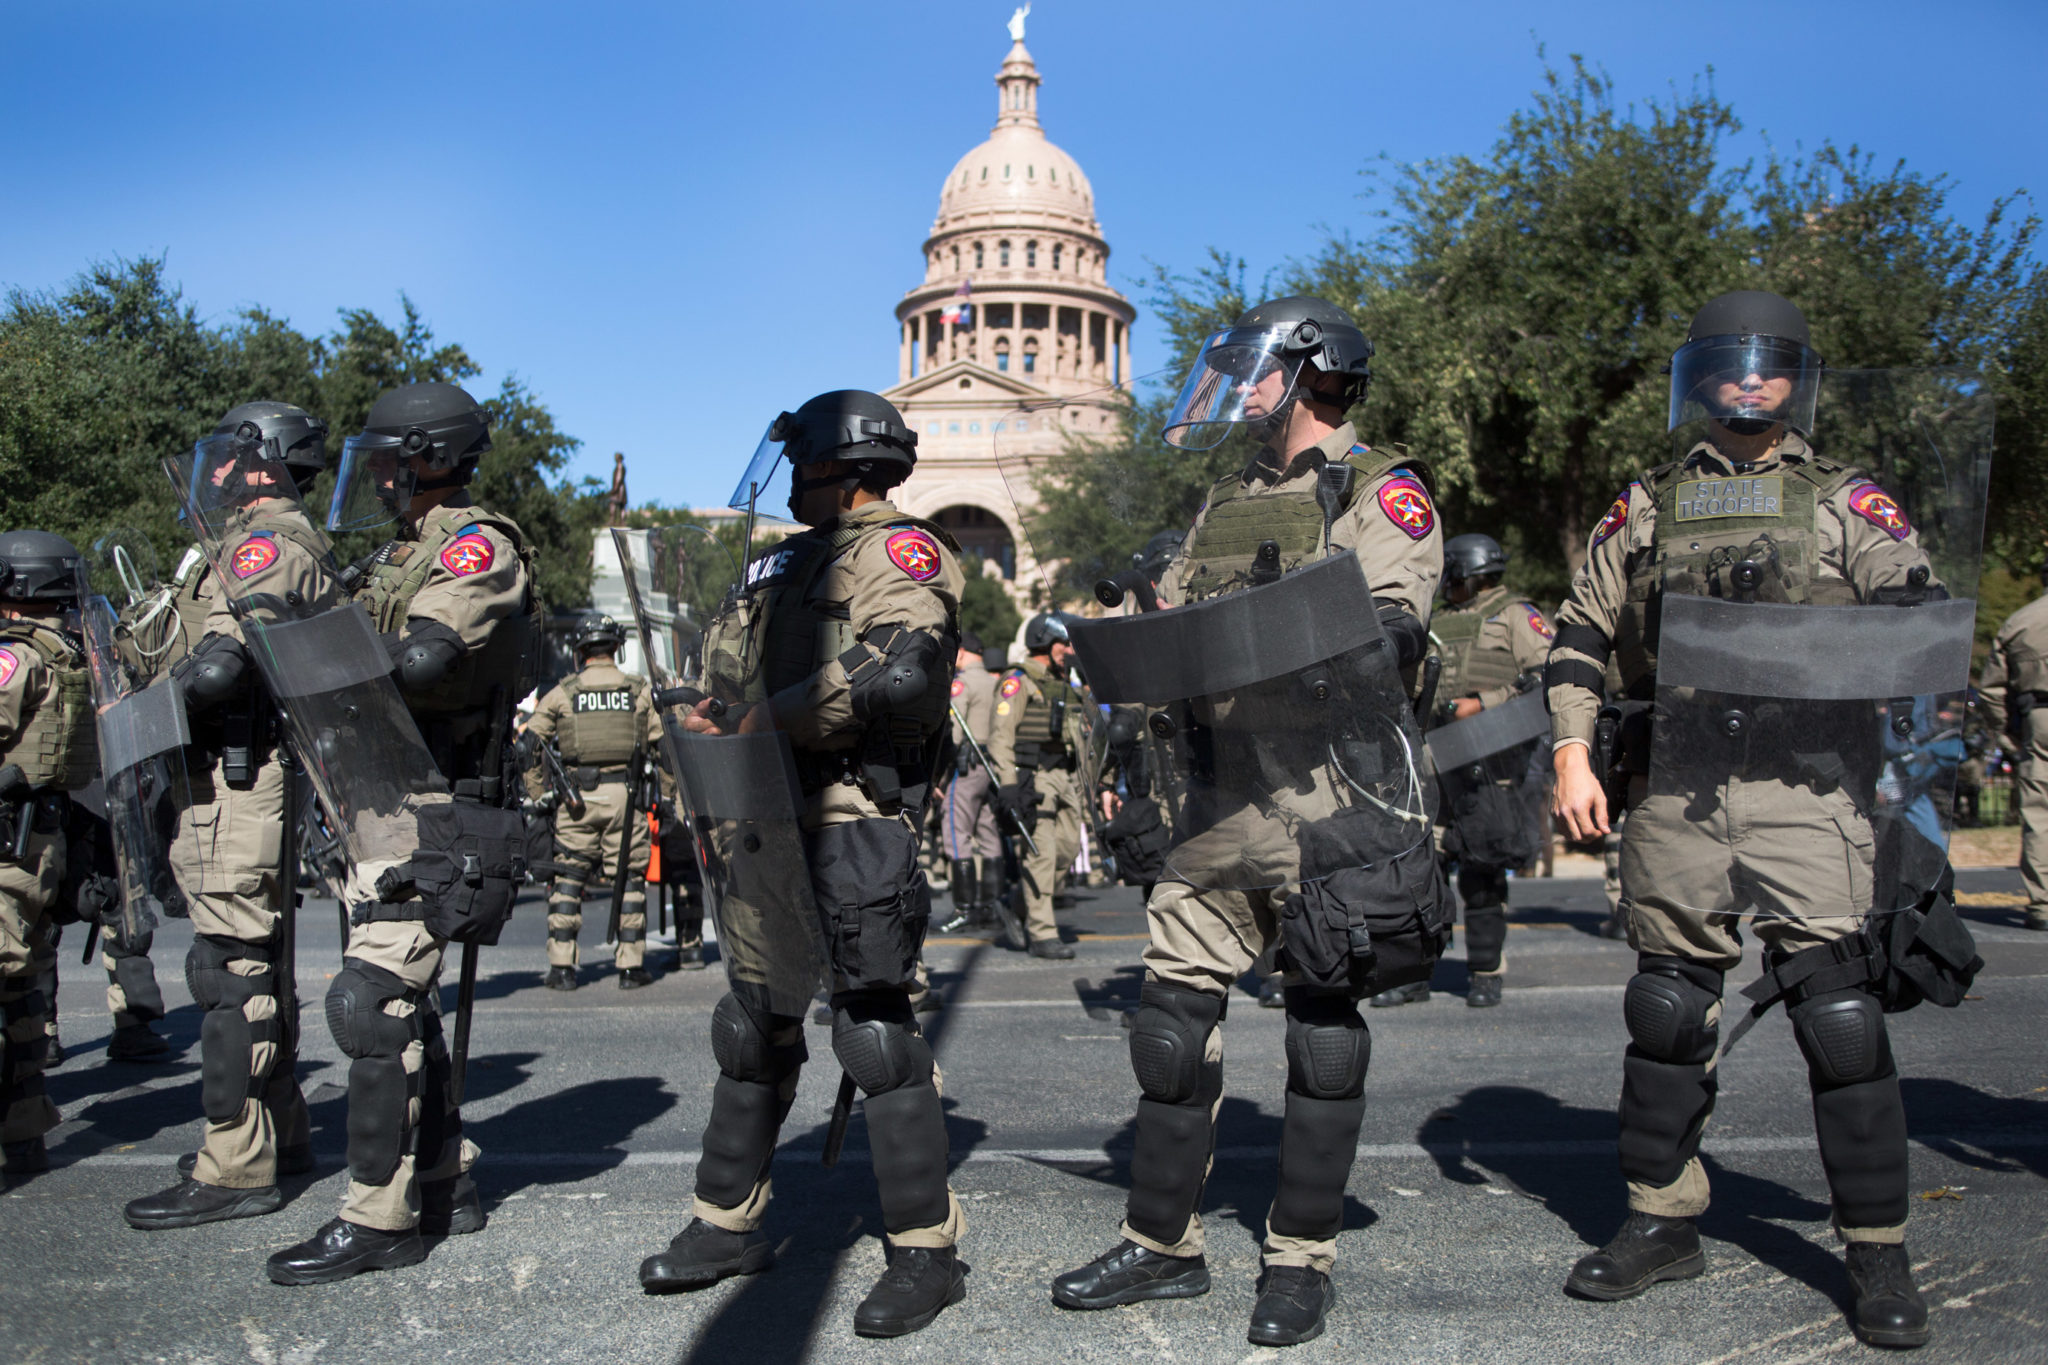 Police wore riot gear outside the Texas Capitol as armed "White Lives Matter Too" demonstrators clashed with counter-protesters.